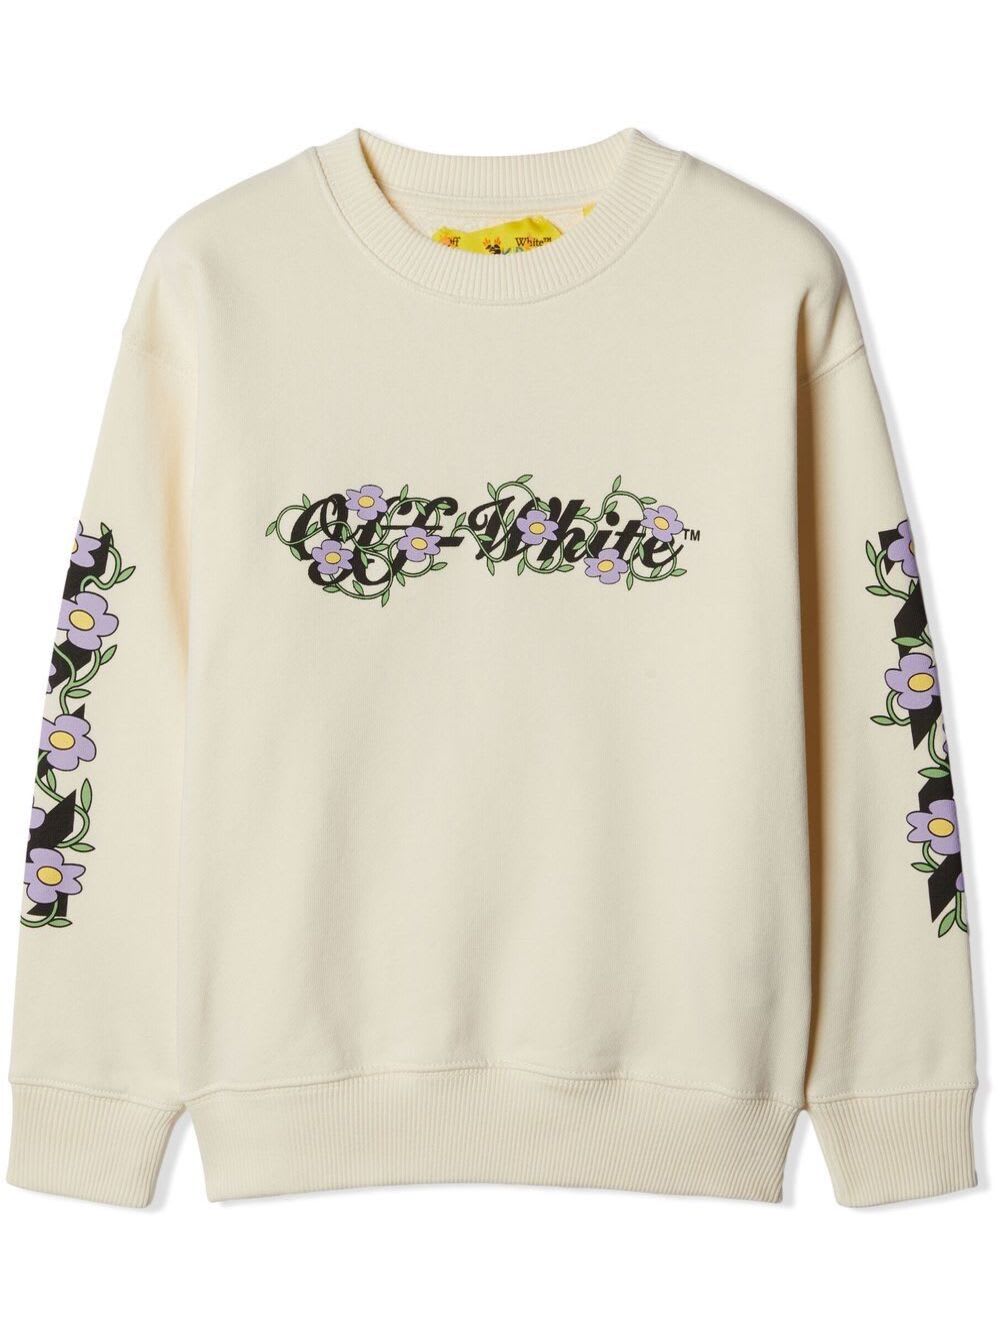 OFF-WHITE OFF-FLOWERS SWEATSHIRT WITH LOGO AND FLORAL MOTIF IN BEIGE COTTON GIRL